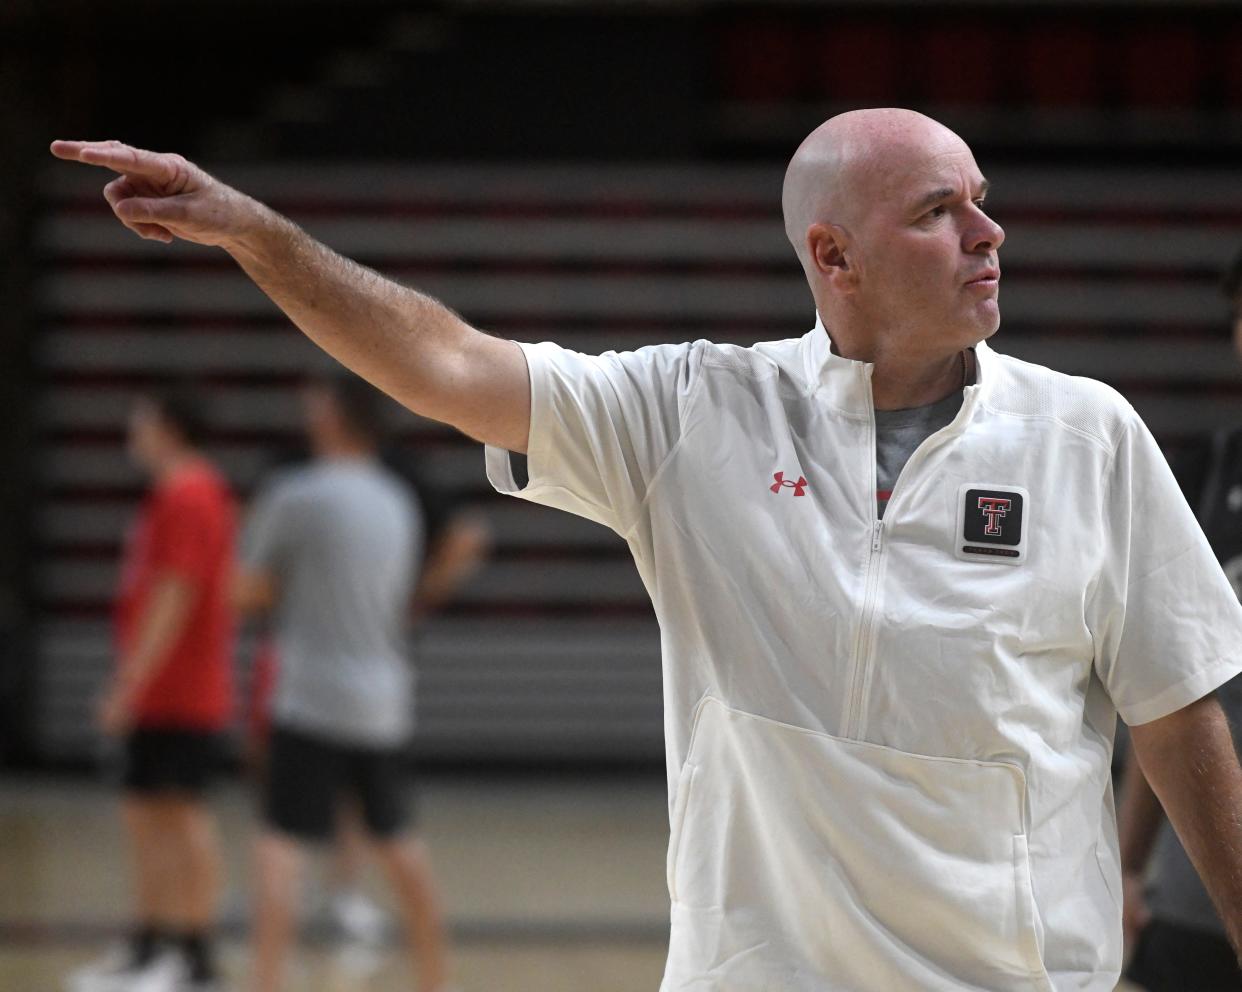 Texas Tech men's assistant coach Dave Smart, shown during a September practice at United Supermarkets Arena, on Tuesday was named head coach at the University of the Pacific. Smart spent one season at Tech after a highly successful head coaching career at Carleton University in Ottawa, Ontario.